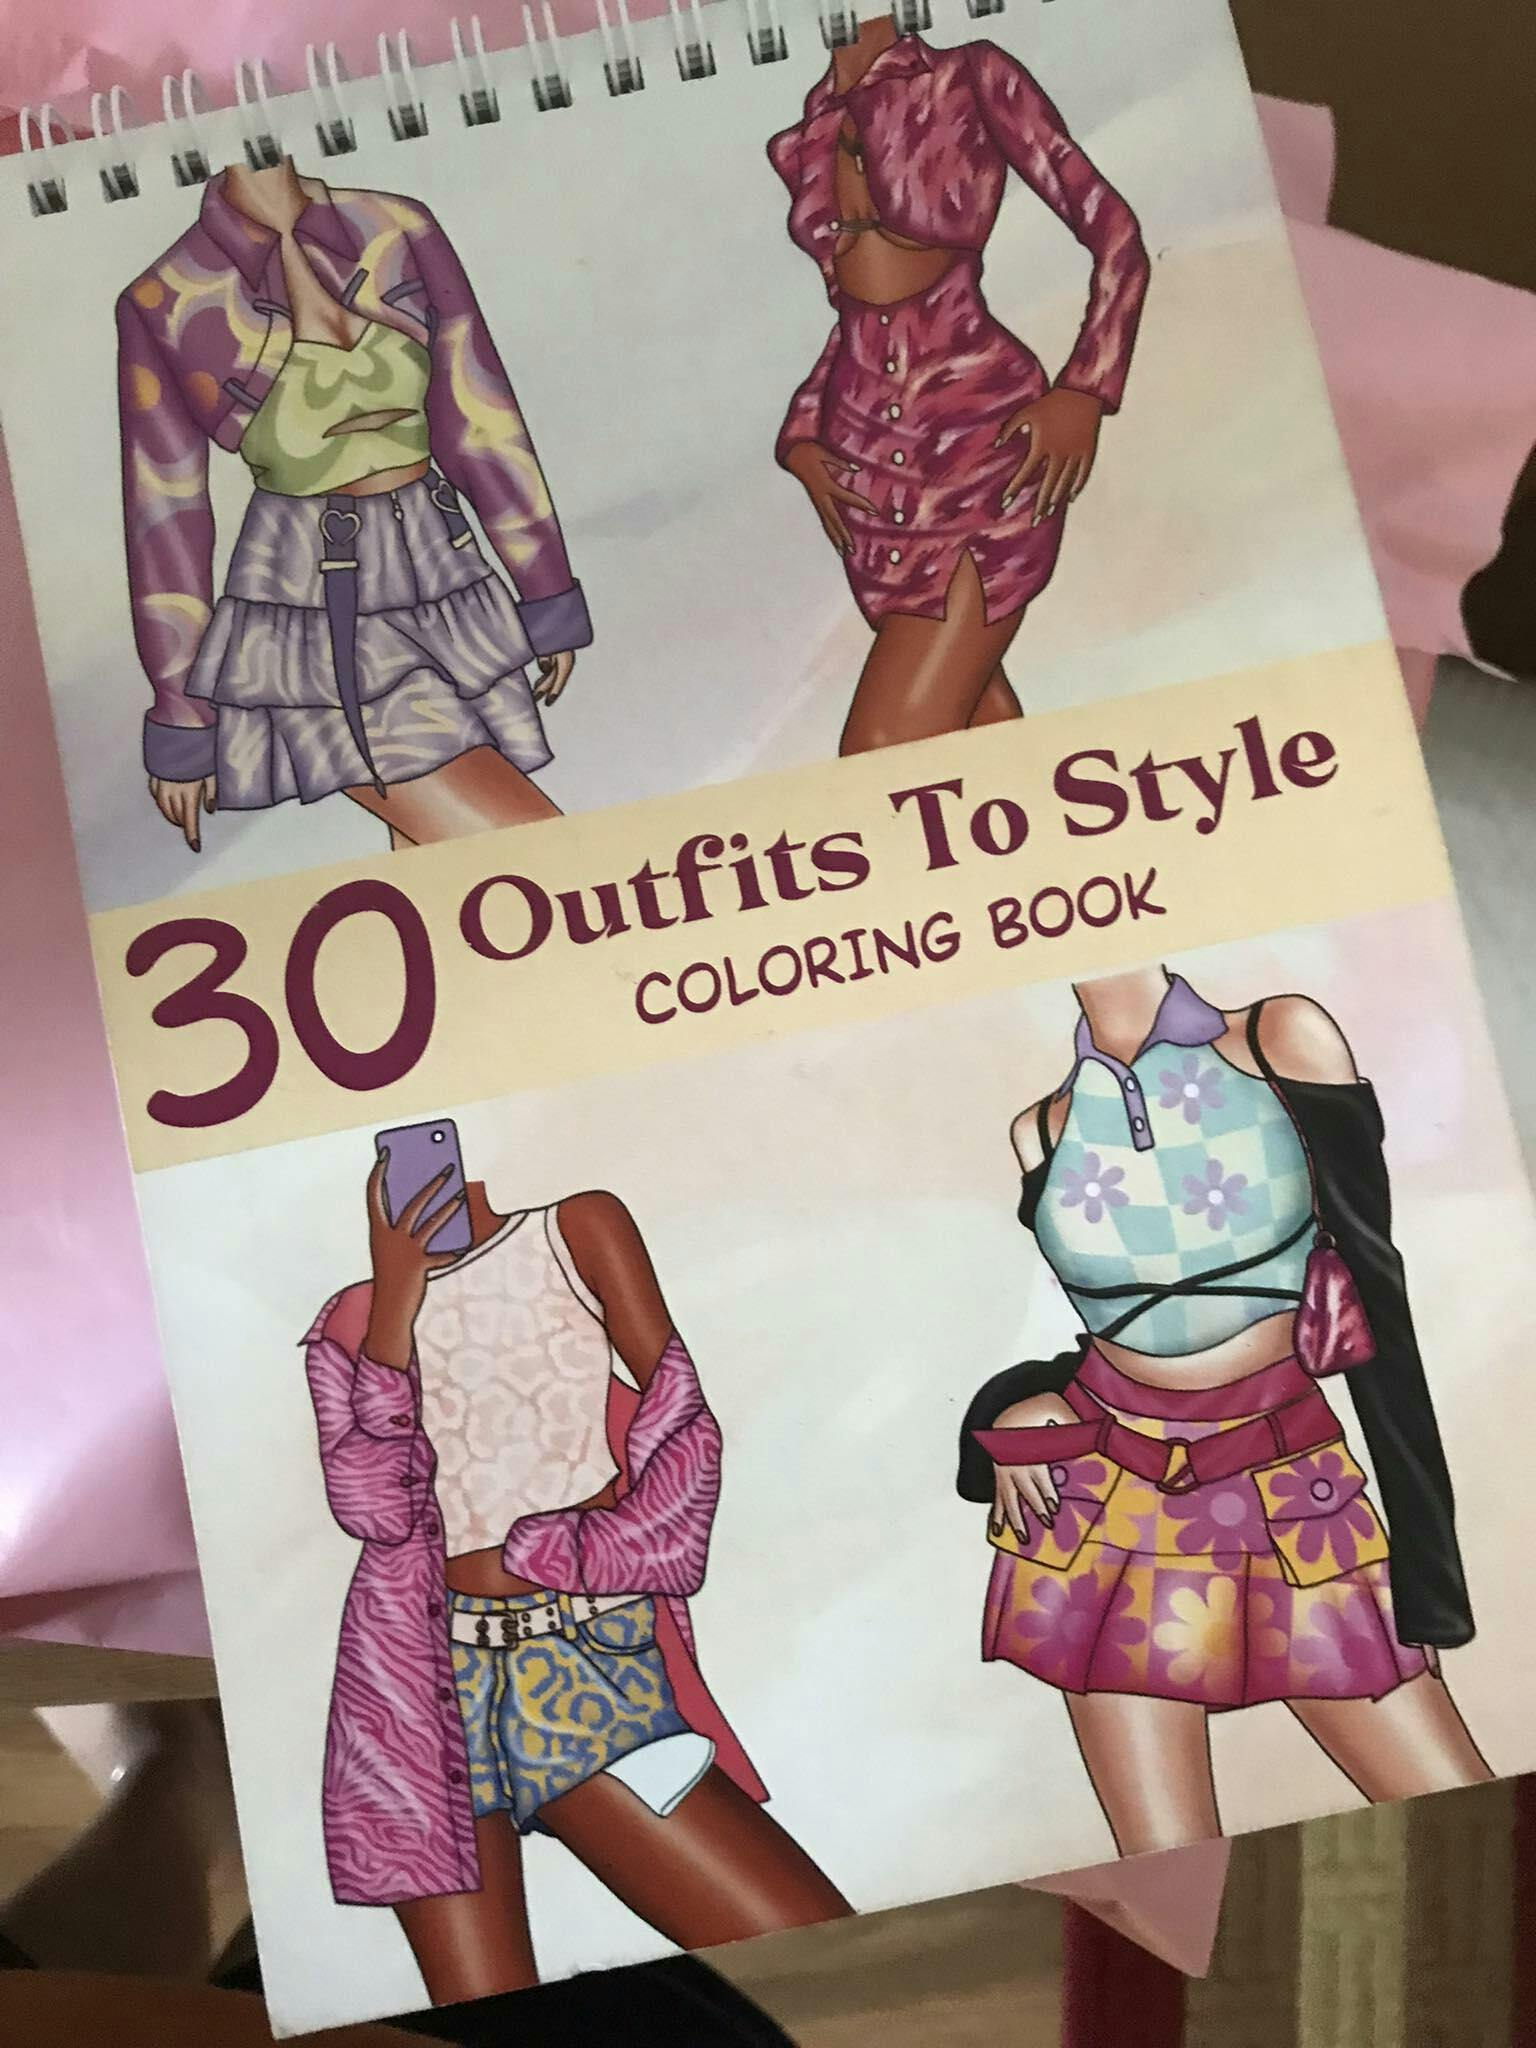 Coloring Hug™ 30 Outfits to Style: A Fashion Coloring Book to Inspire